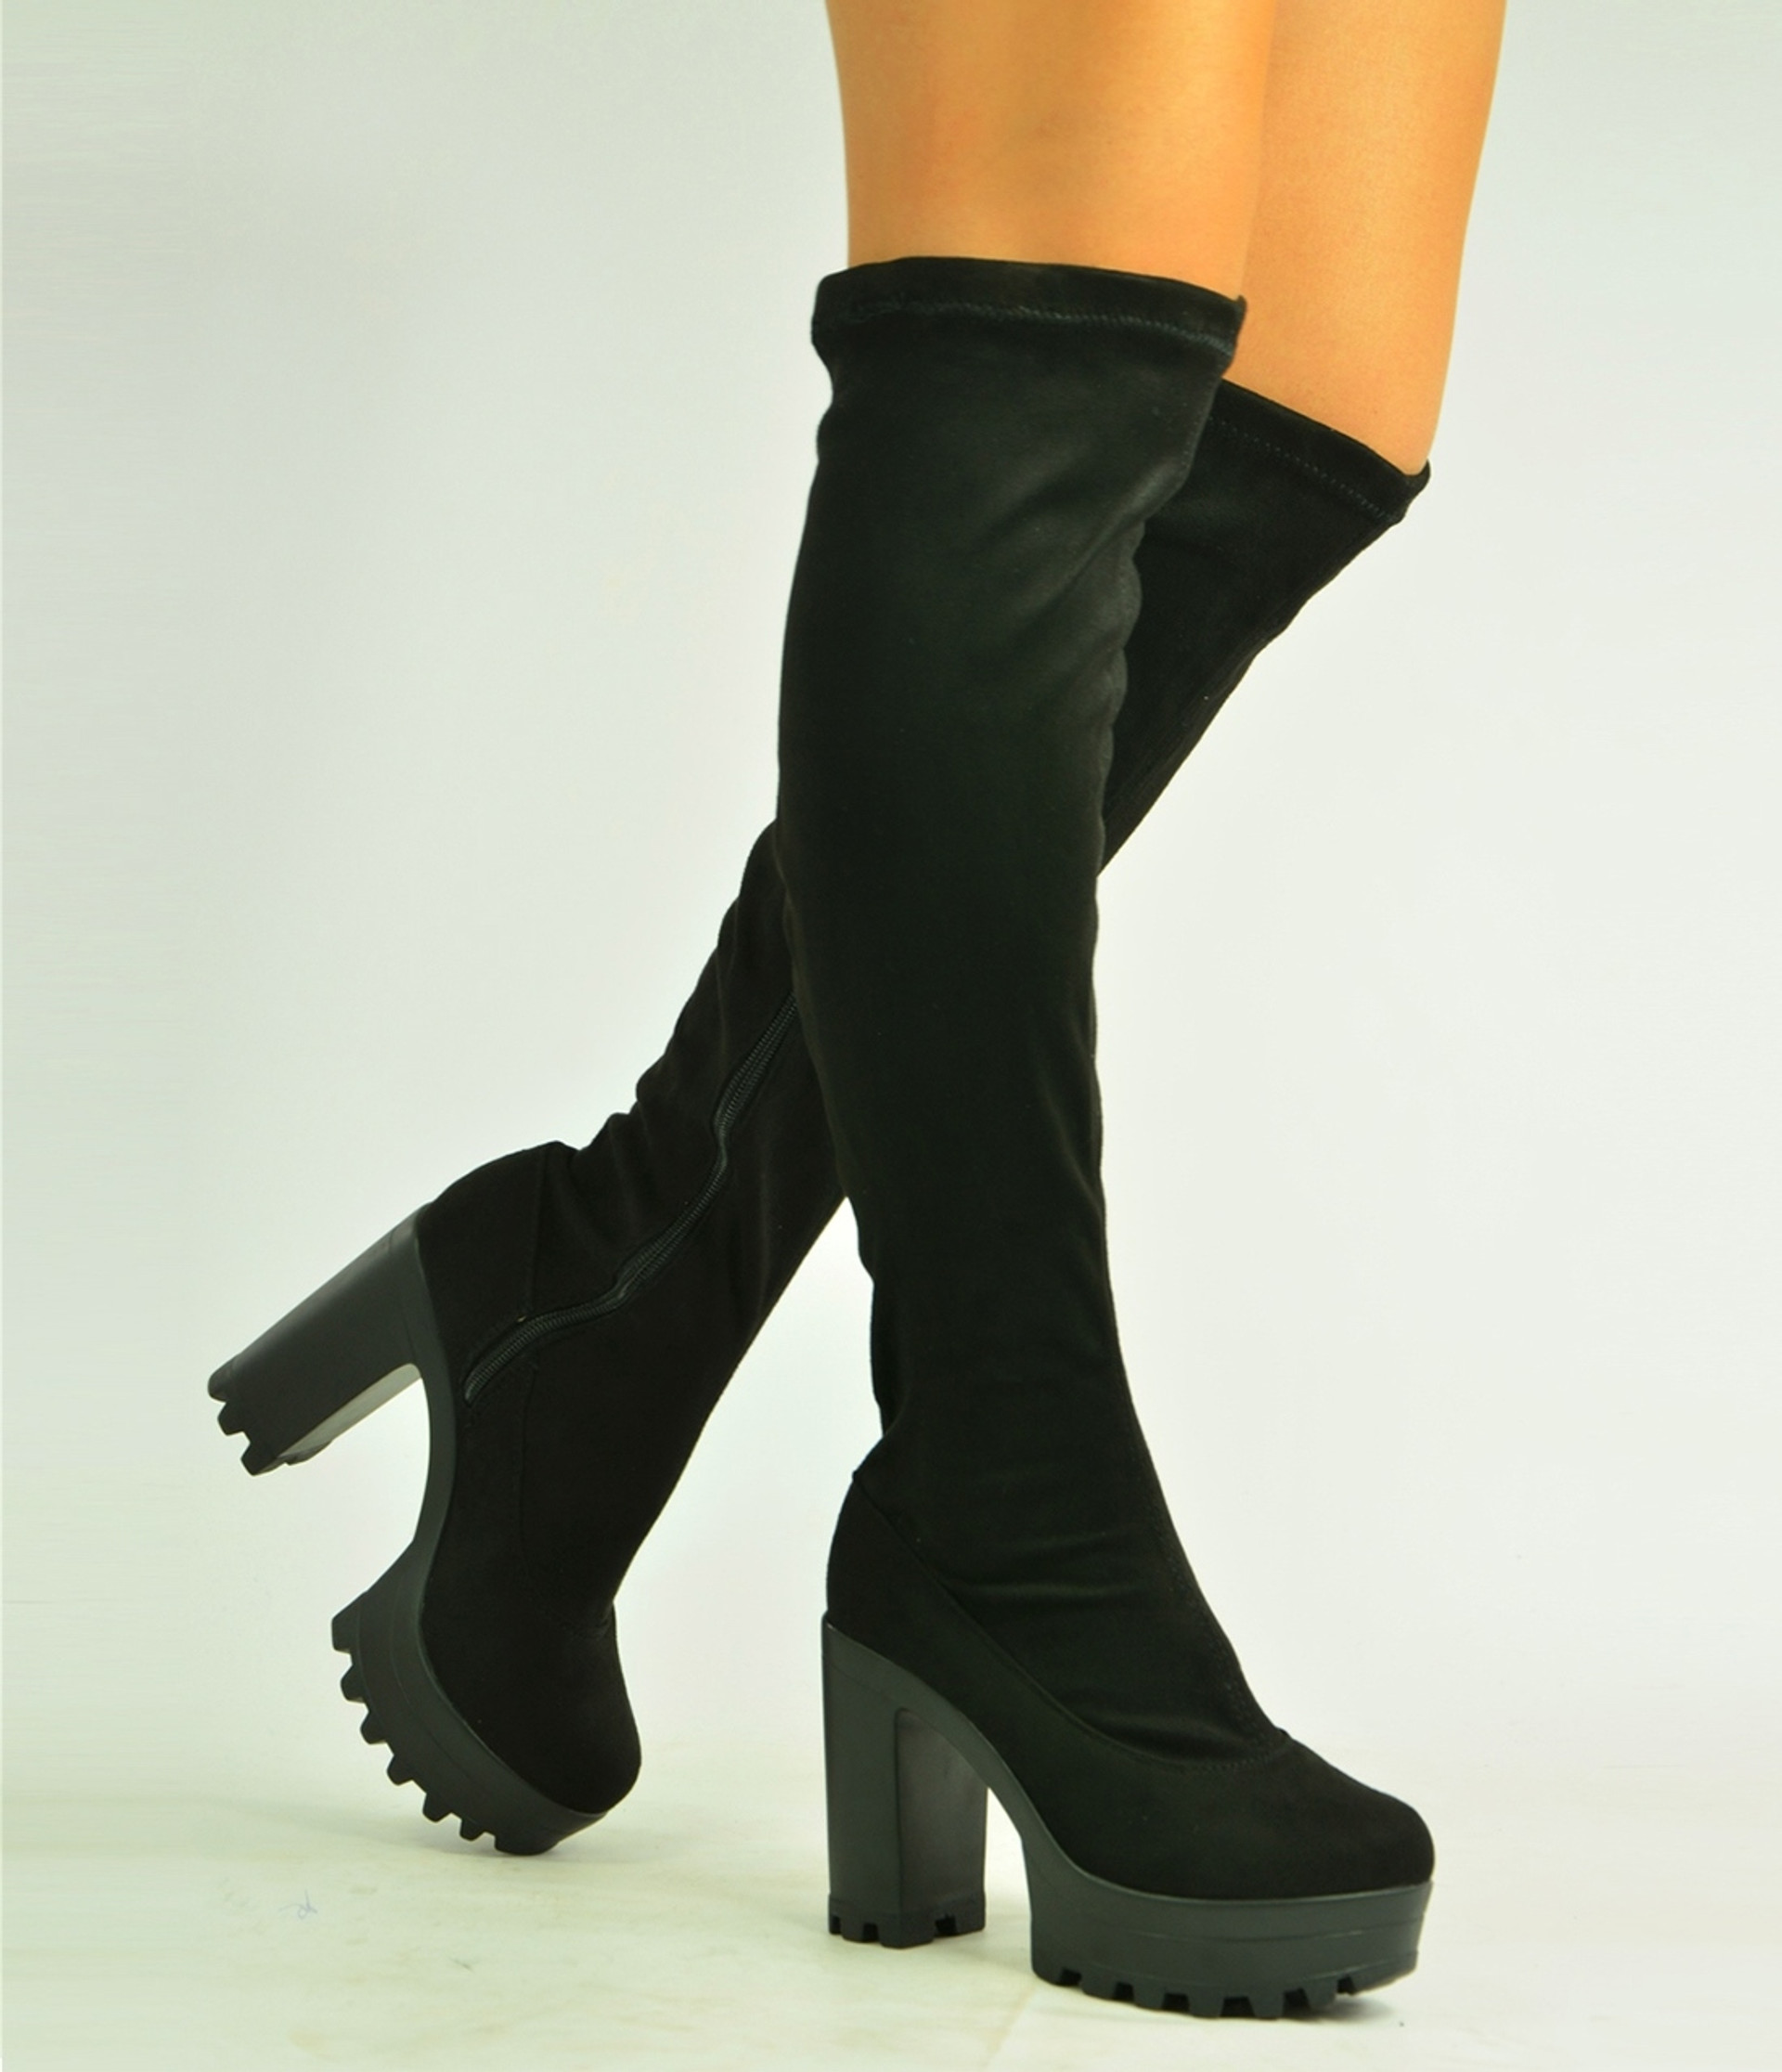 NEW WOMENS BLACK SUEDE KNEE BOOTS CLEATED PLATFORM SHOES SIZE UK 3-8